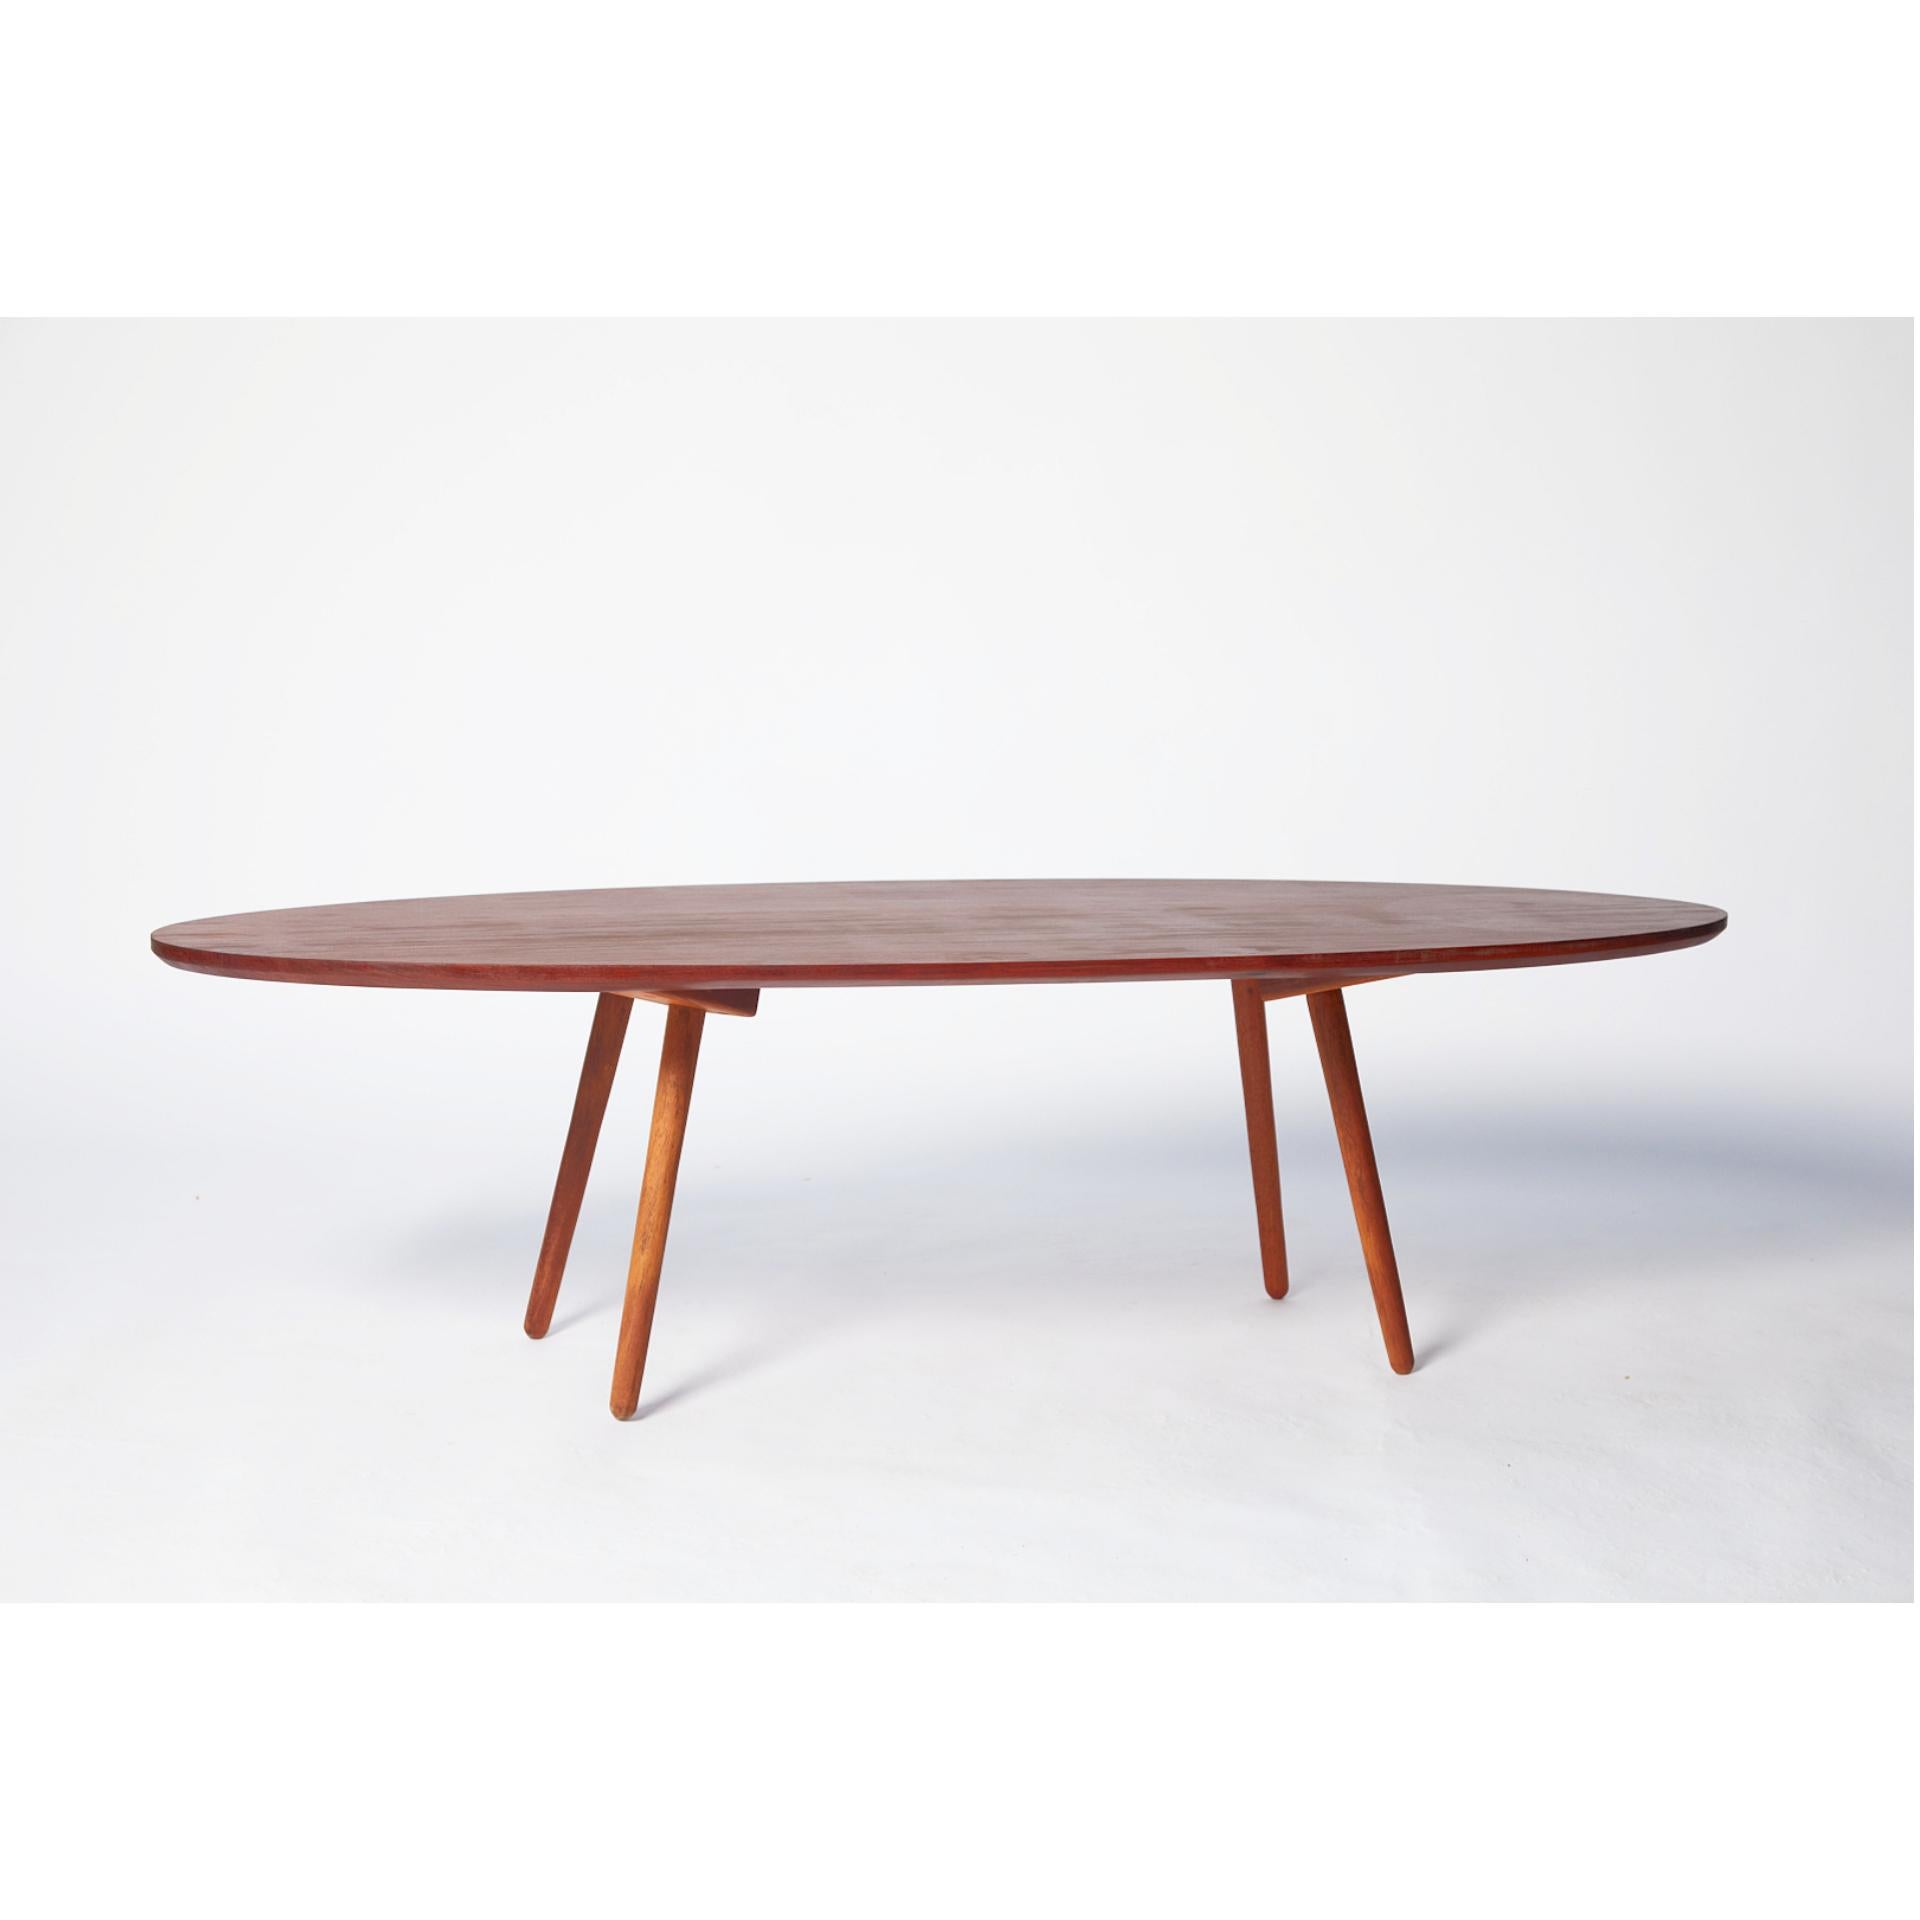 'Banquisa' Cofee Table - Brazilian design by André Bianco For Sale 3